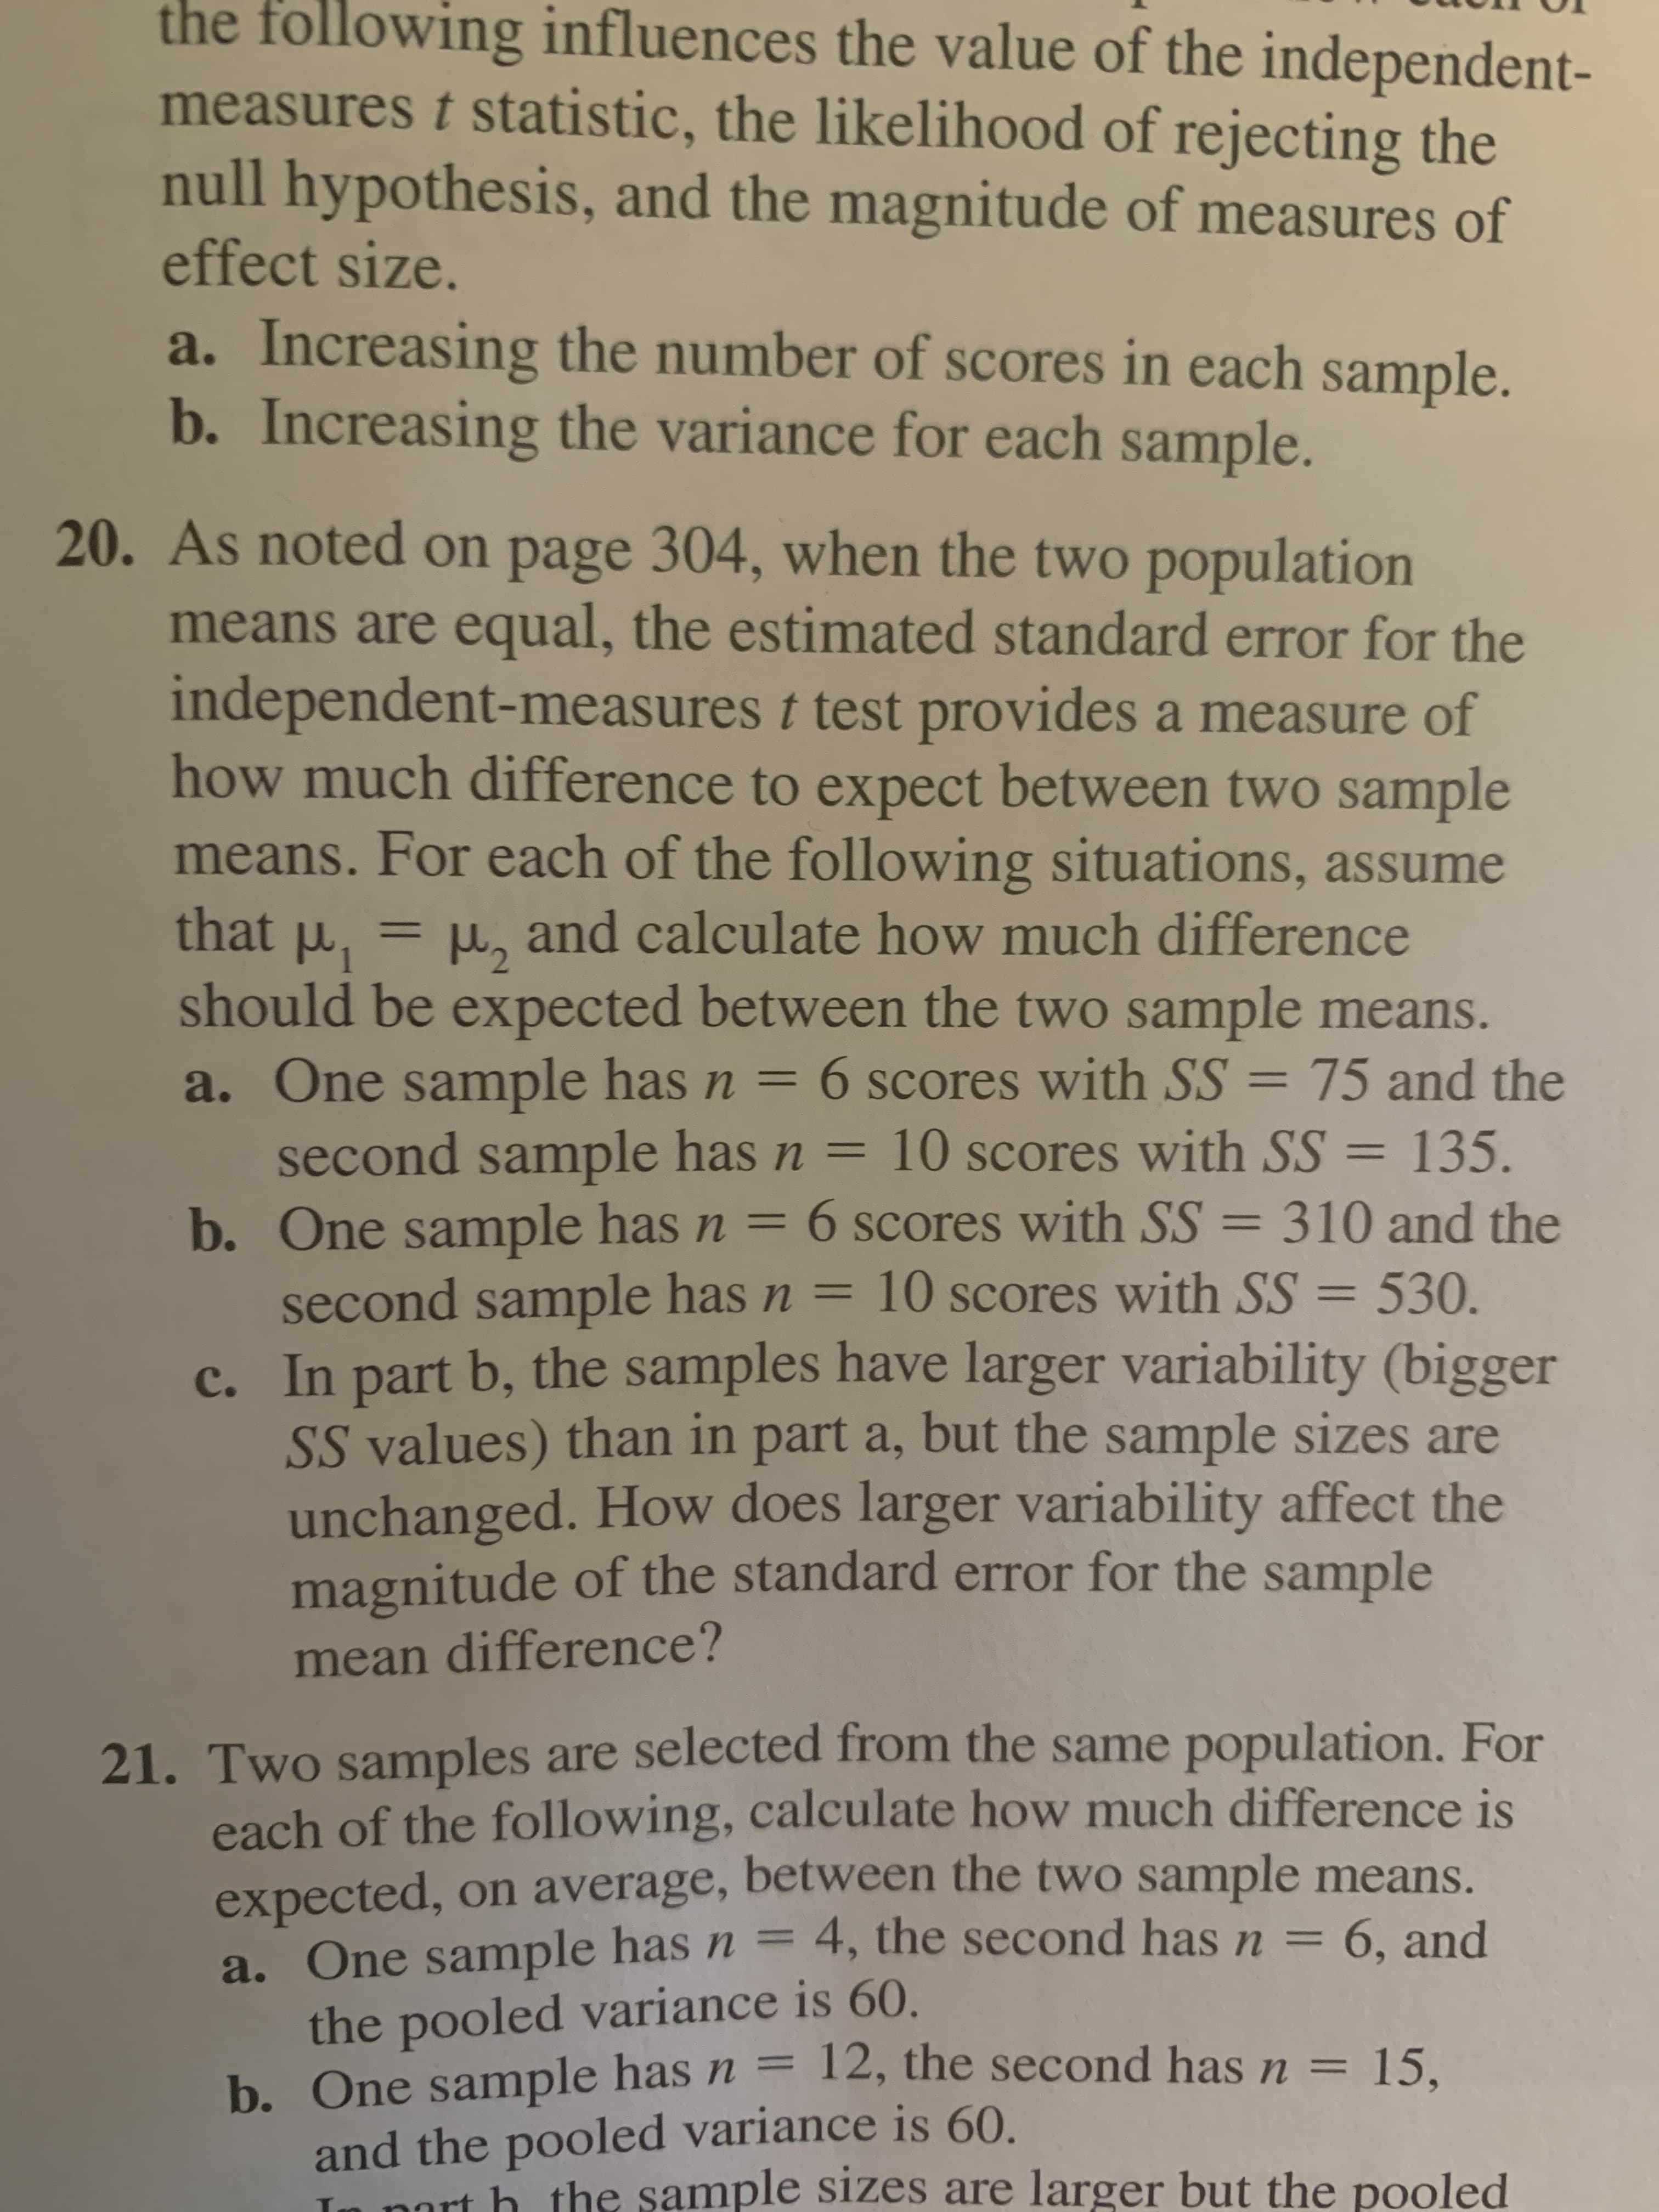 the following influences the value of the independent-
measures t statistic, the likelihood of rejecting the
null hypothesis, and the magnitude of measures of
effect size.
a. Increasing the number of scores in each sample.
b. Increasing the variance for each sample.
20. As noted on page 304, when the two population
means are equal, the estimated standard error for the
independent-measures t test provides a measure of
how much difference to expect between two sample
means. For each of the following situations, assume
should be expected between the two sample means.
that P
a. One sample has n = 6 scores with SS = 75 and the
second sample has n = 10 scores with SS = 135.
b. One sample has n = 6 scores with SS = 310 and the
second sample has n = 10 scores with SS = 530.
c. In part b, the samples have larger variability (bigger
SS values) than in part a, but the sample sizes are
unchanged. How does larger variability affect the
magnitude of the standard error for the sample
and calculate how much difference
%3D
%3D
%3D
%3D
%3D
%3D
%3D
%3D
mean difference?
21. Two samples are selected from the same population. For
each of the following, calculate how much difference is
expected, on average, between the two sample means.
a. One sample has n = 4, the second has n = 6, and
the pooled variance is 60.
b. One sample has n = 12, the second has n = 15.
and the pooled variance is 60.
In port h the sample sizes are larger but the pooled
%3D
%3D
%3D
